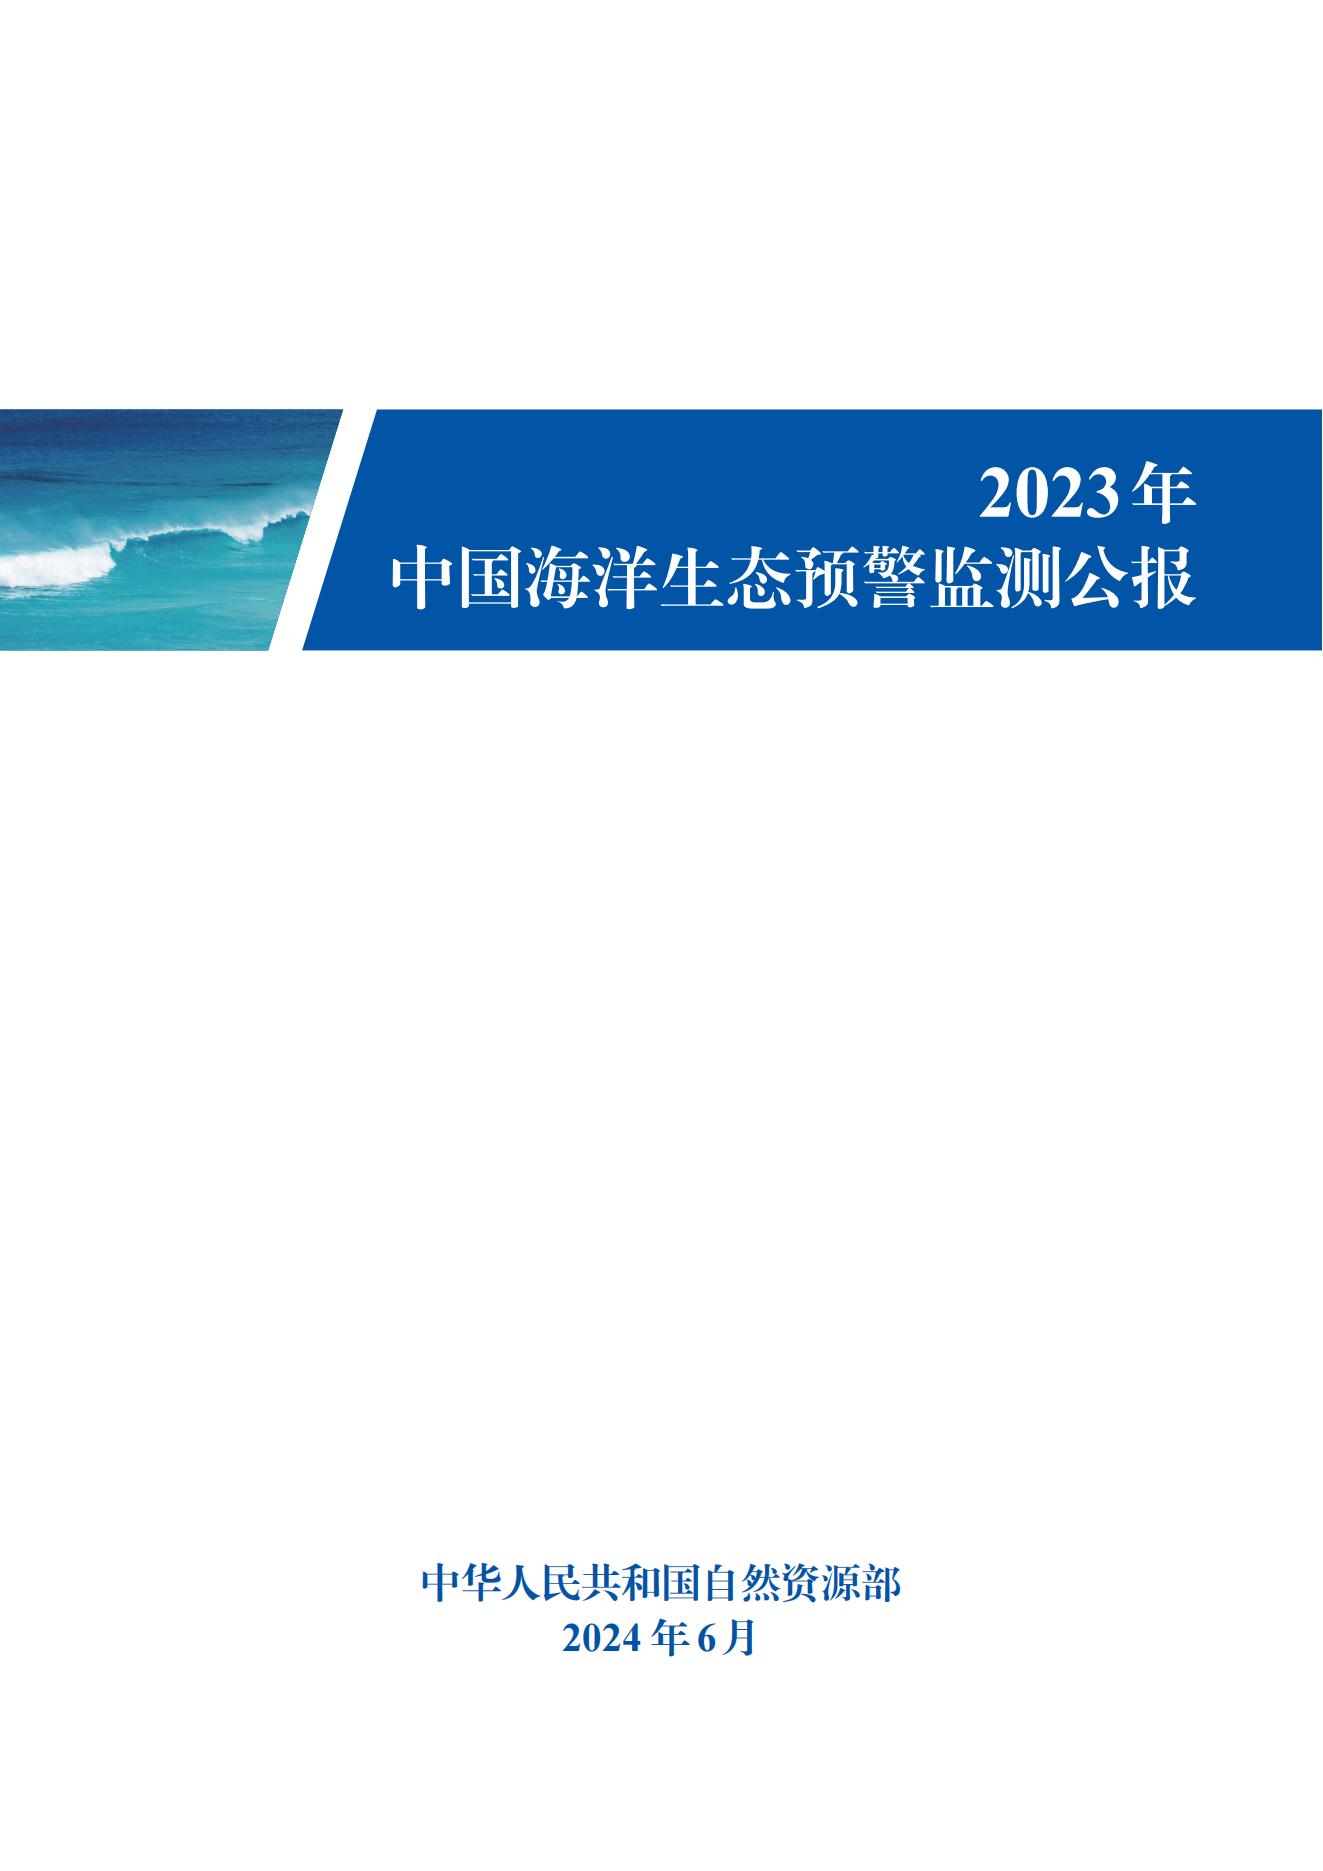 The State of Coastal and Marine Ecosystems in China 2023